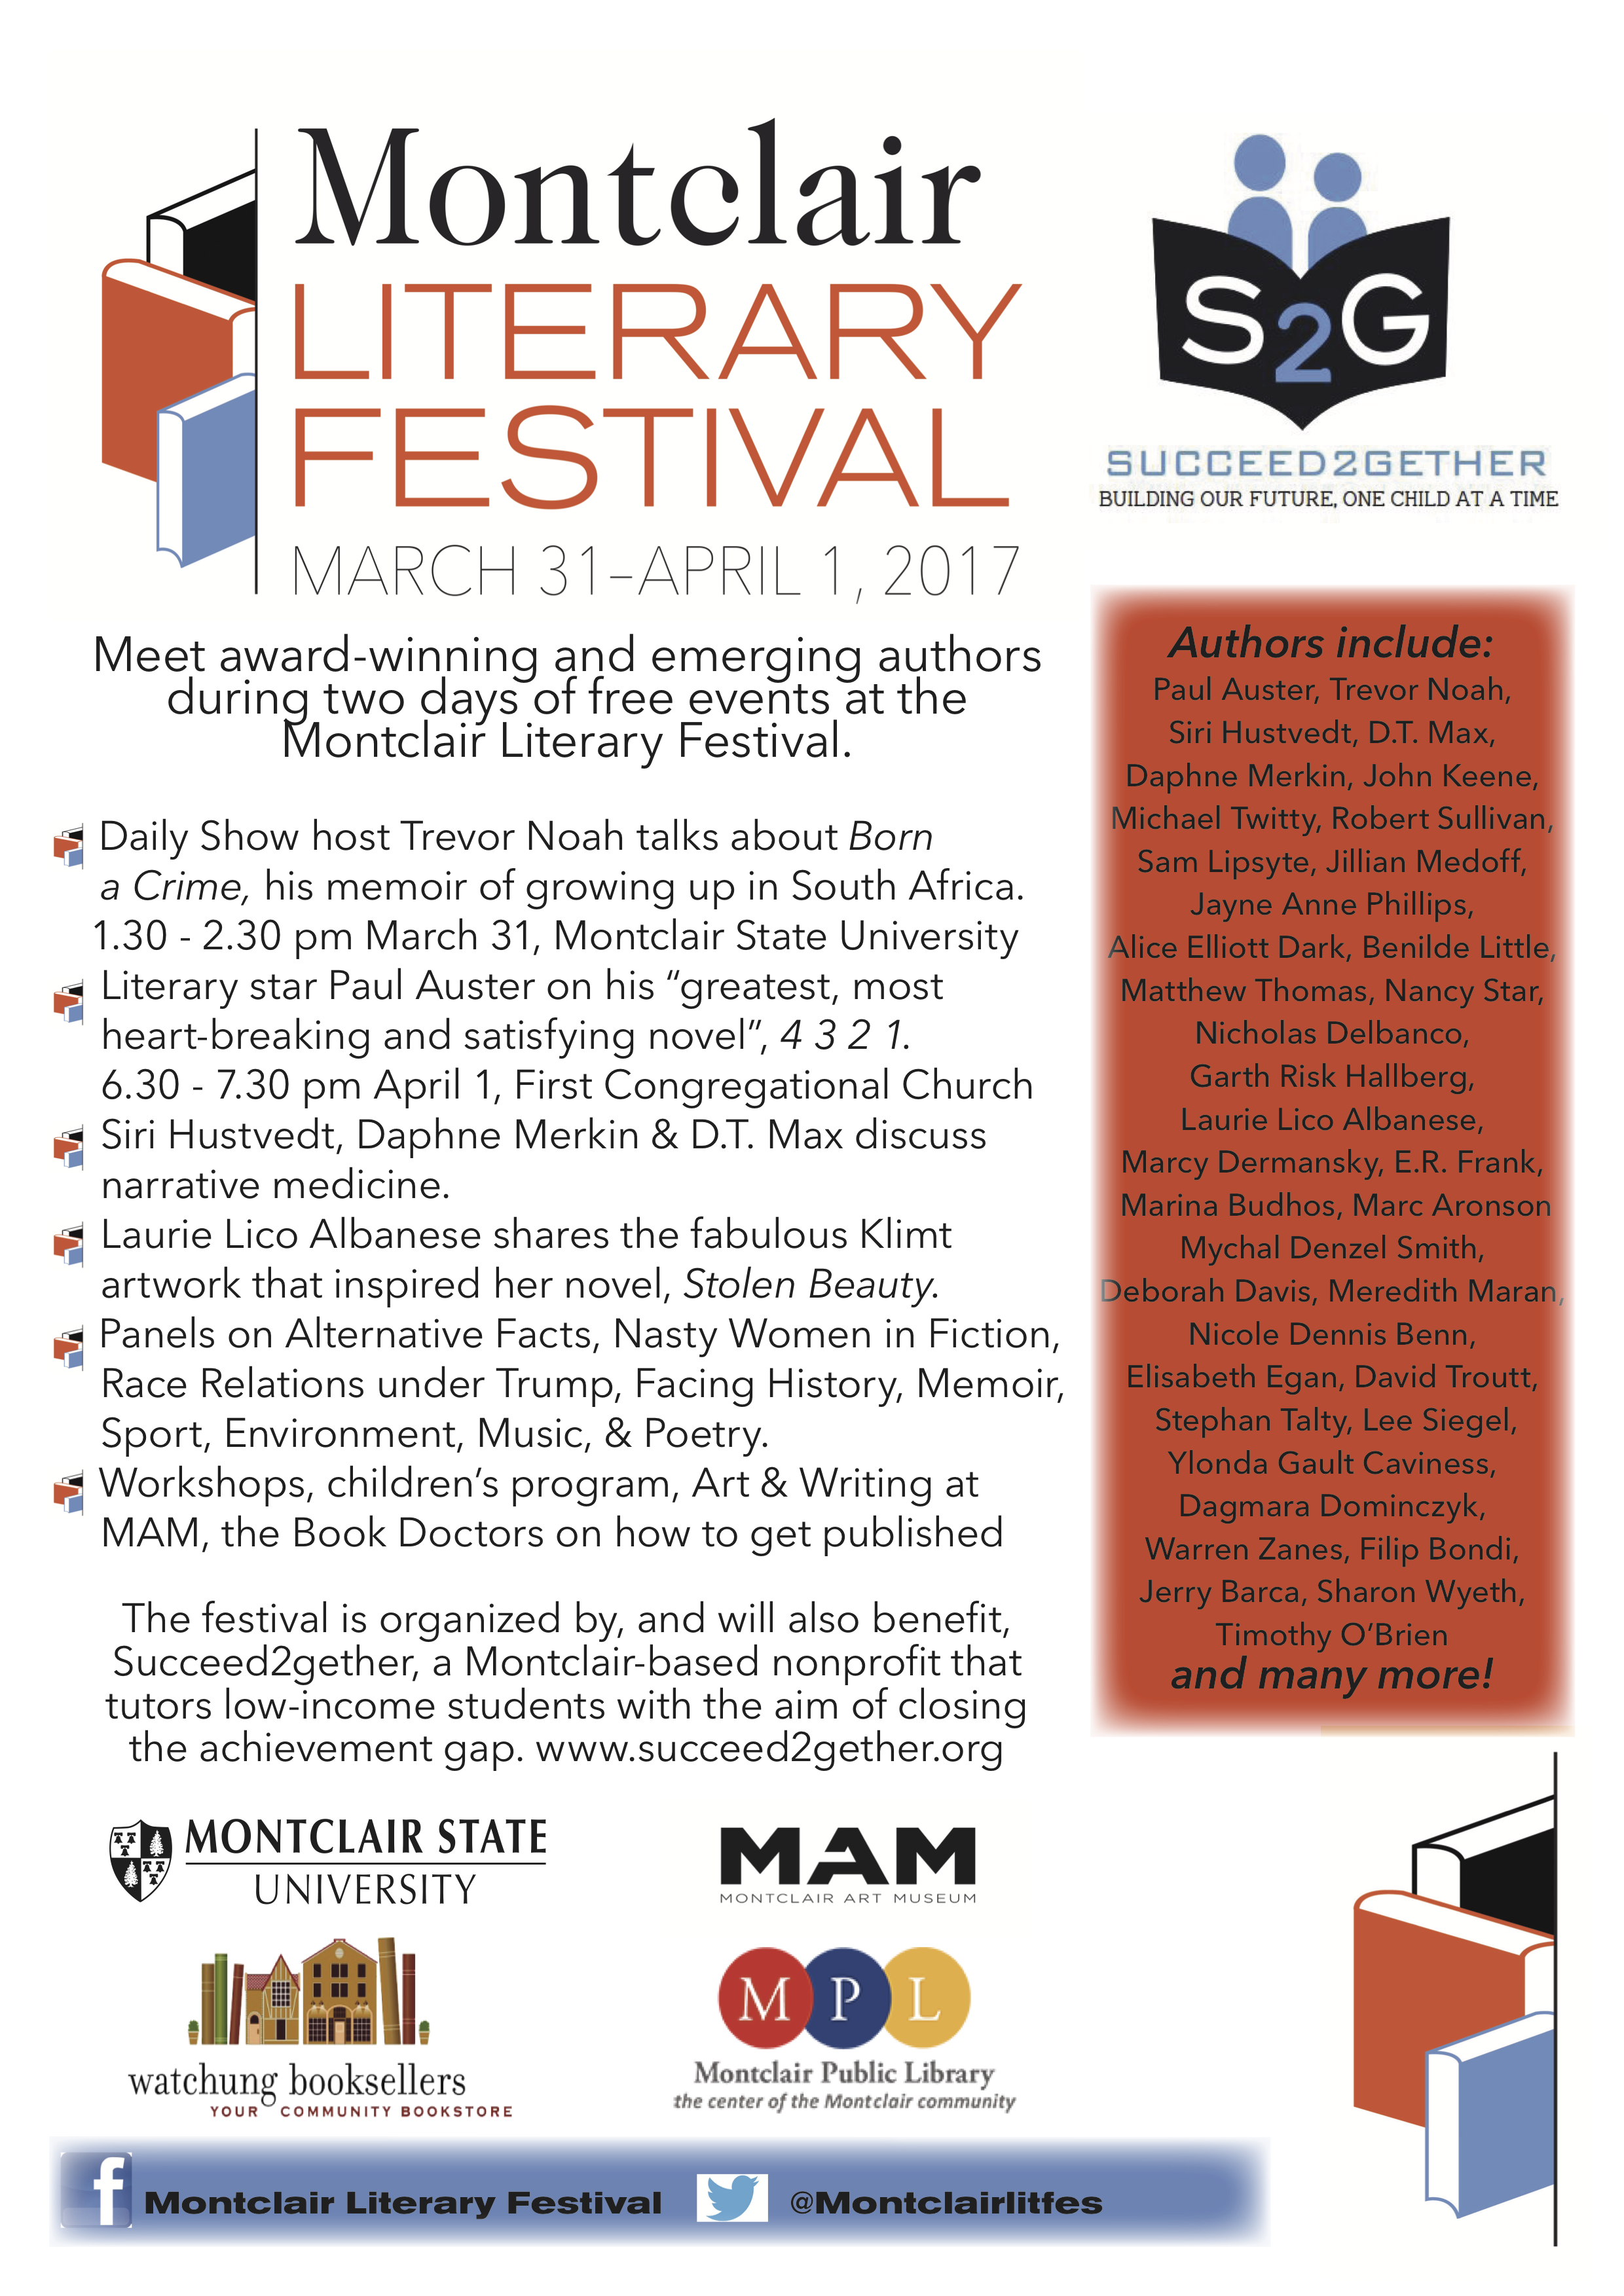 Montclair Literary Festival Flyer Succeed2gether